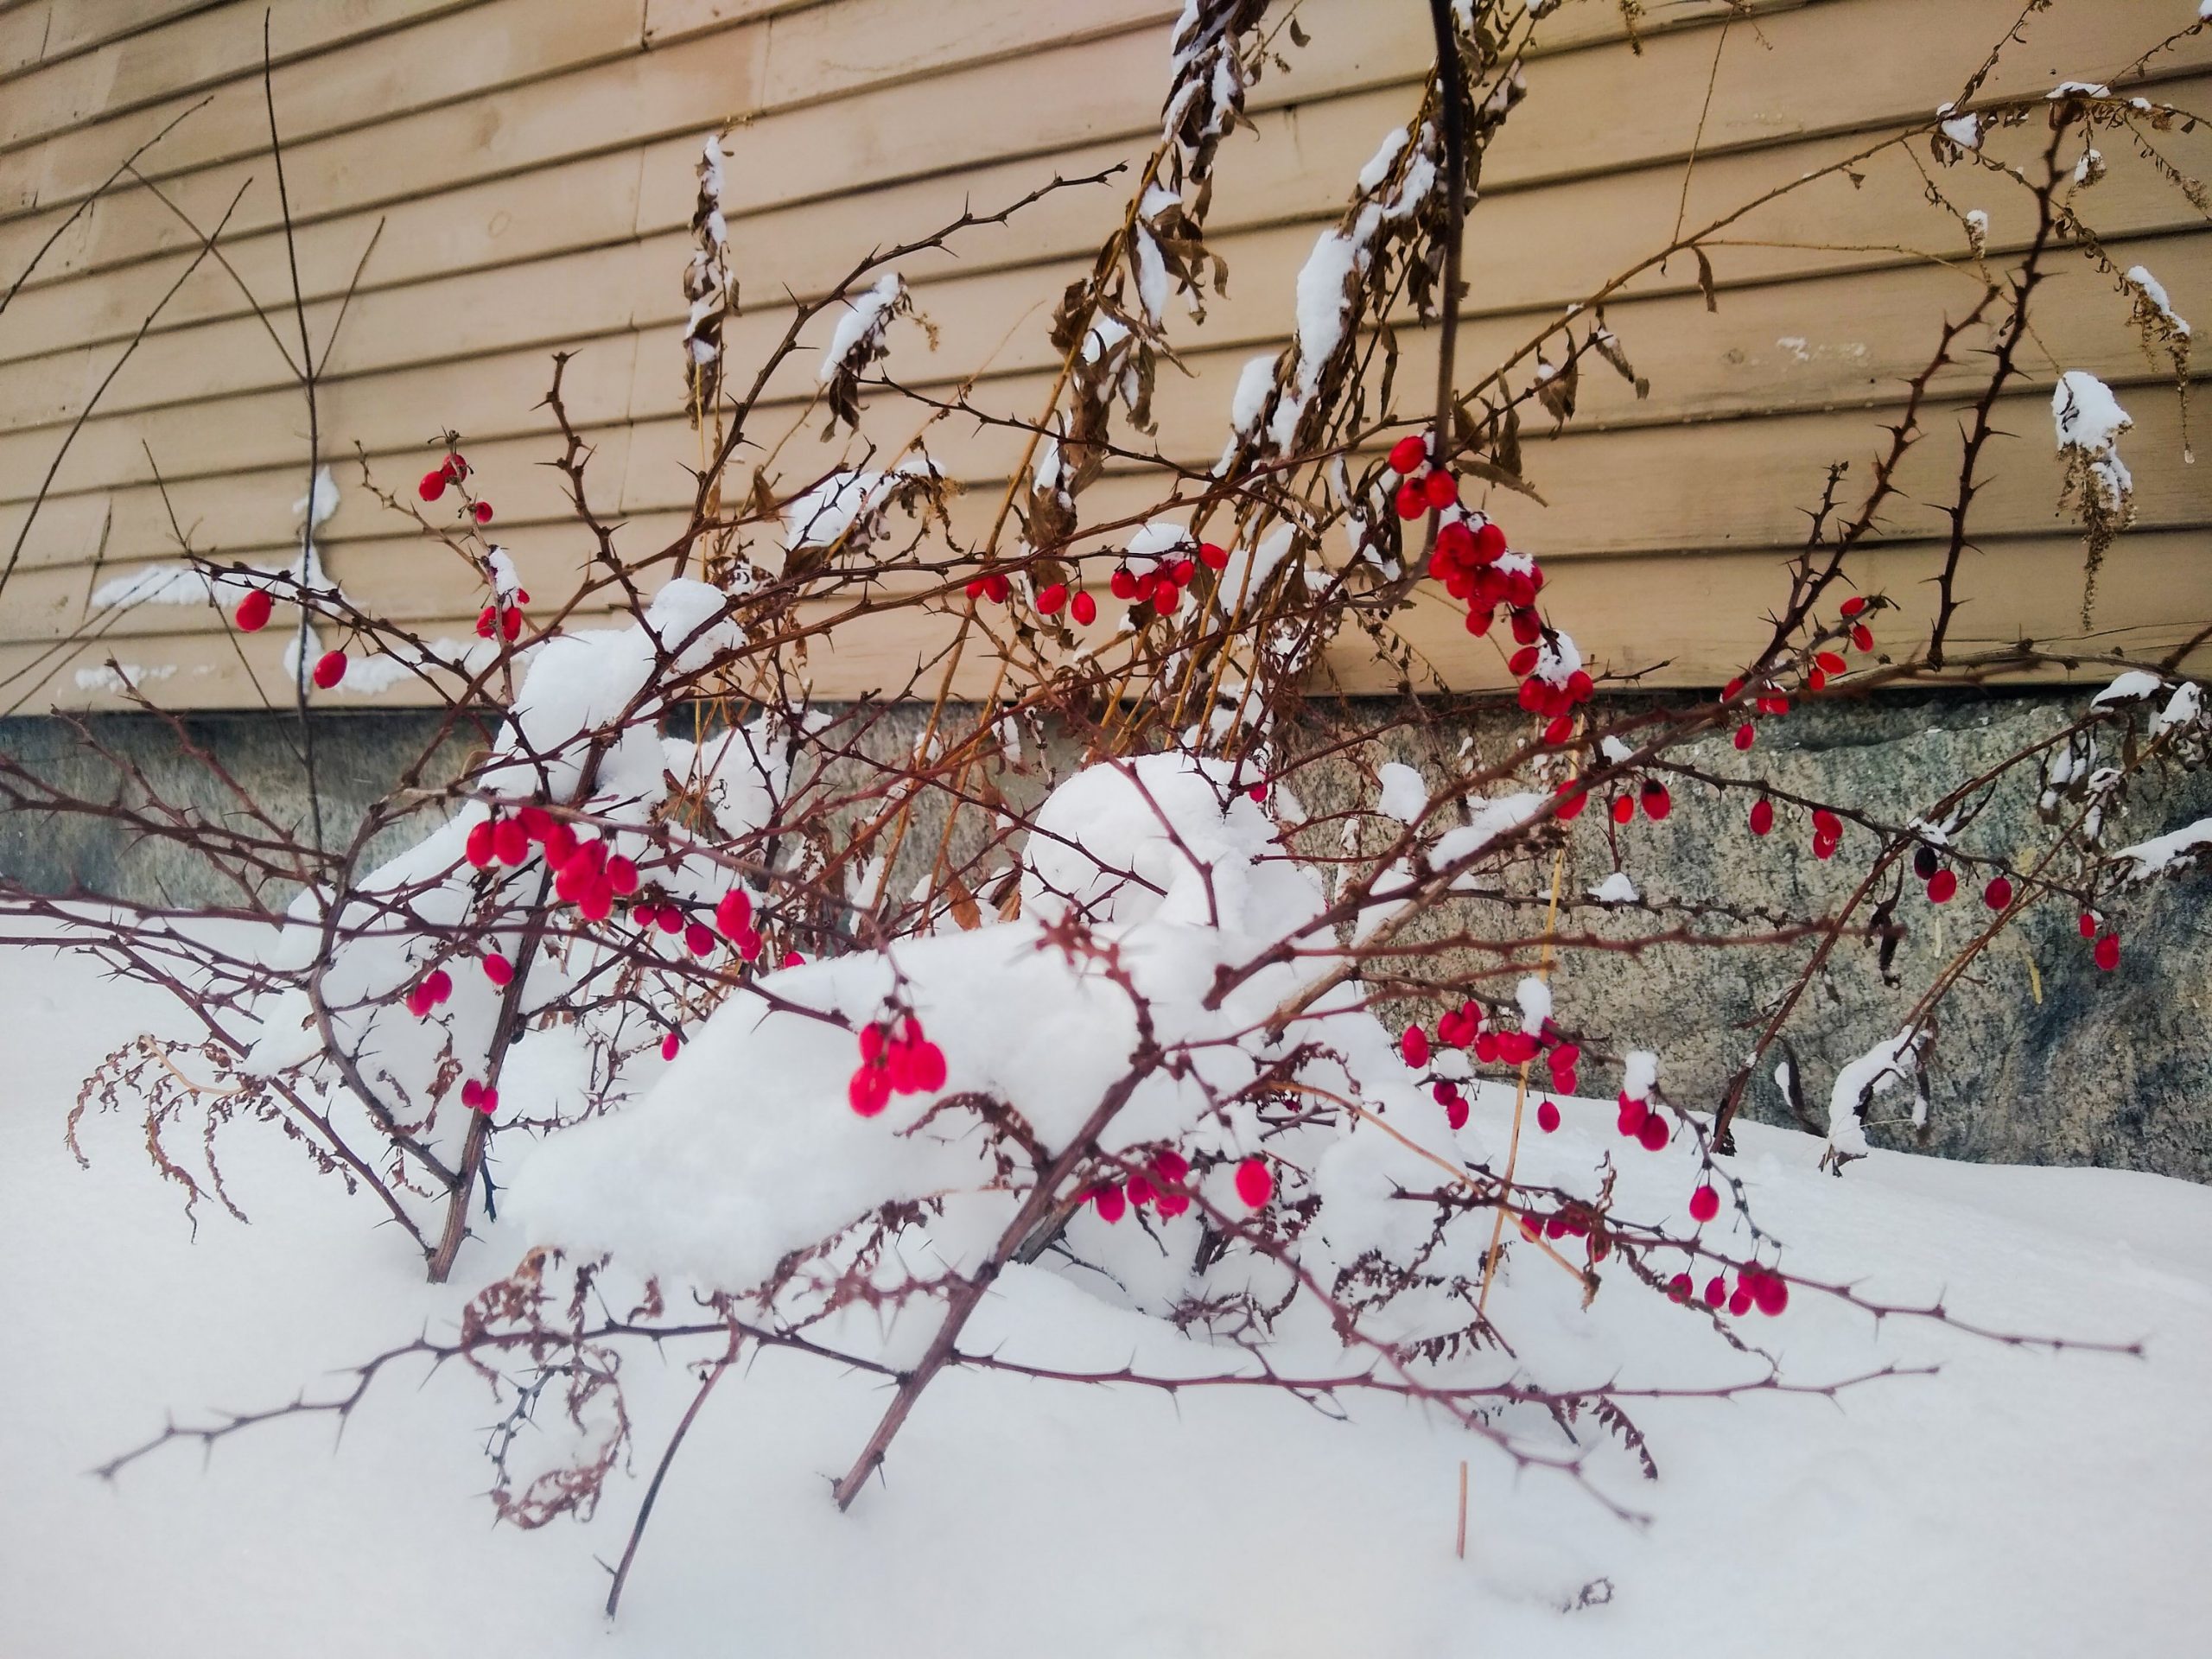 Image of Japanese barberry bush in winter